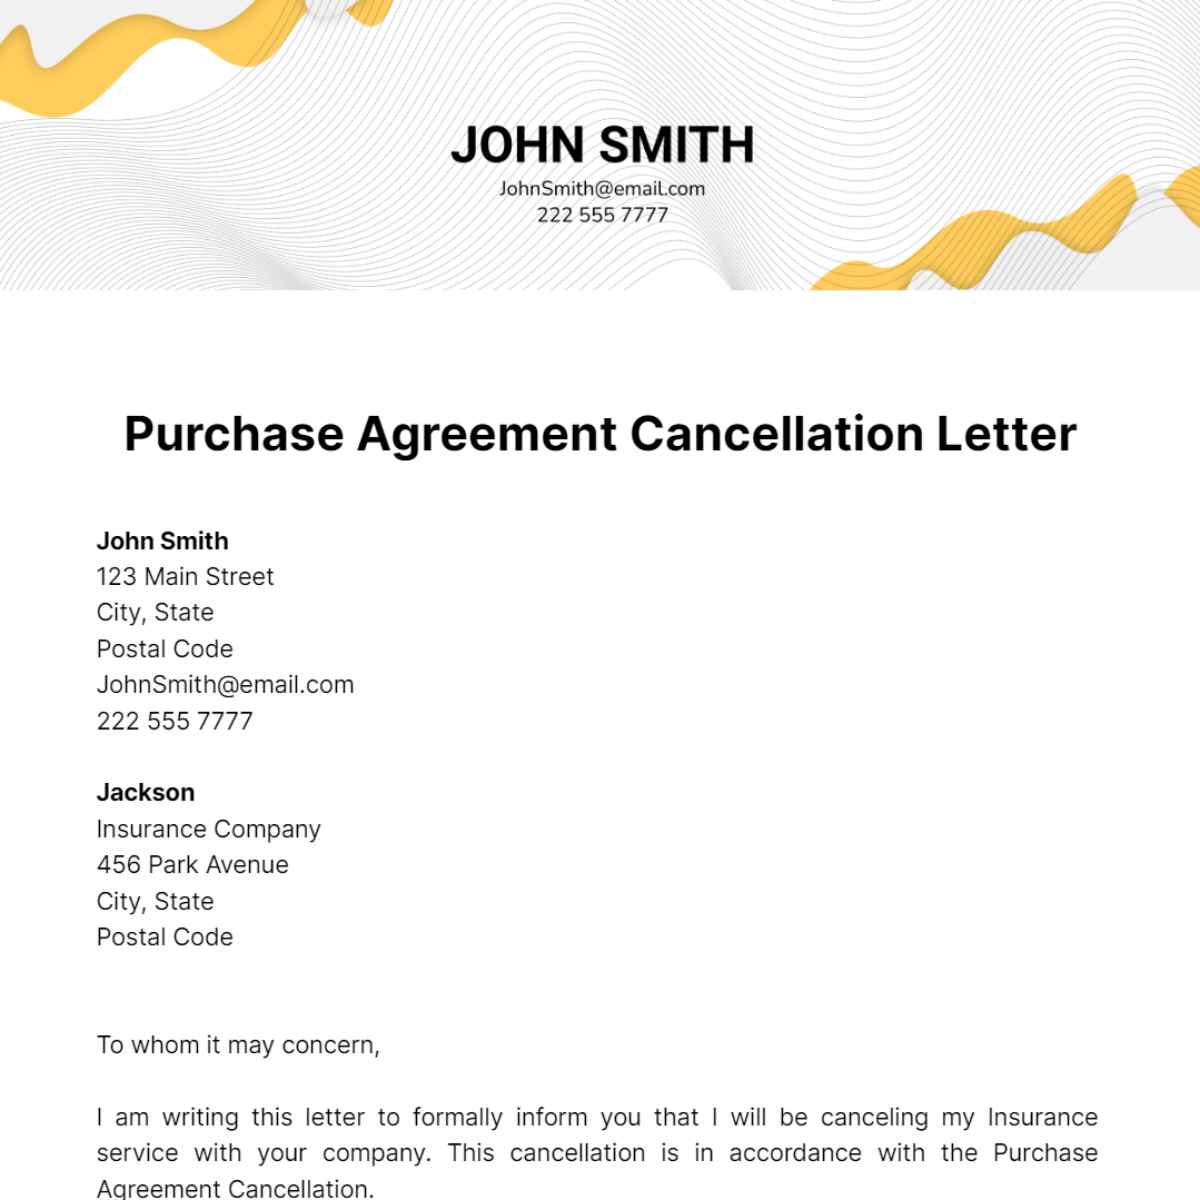 Purchase Agreement Cancellation Letter Template